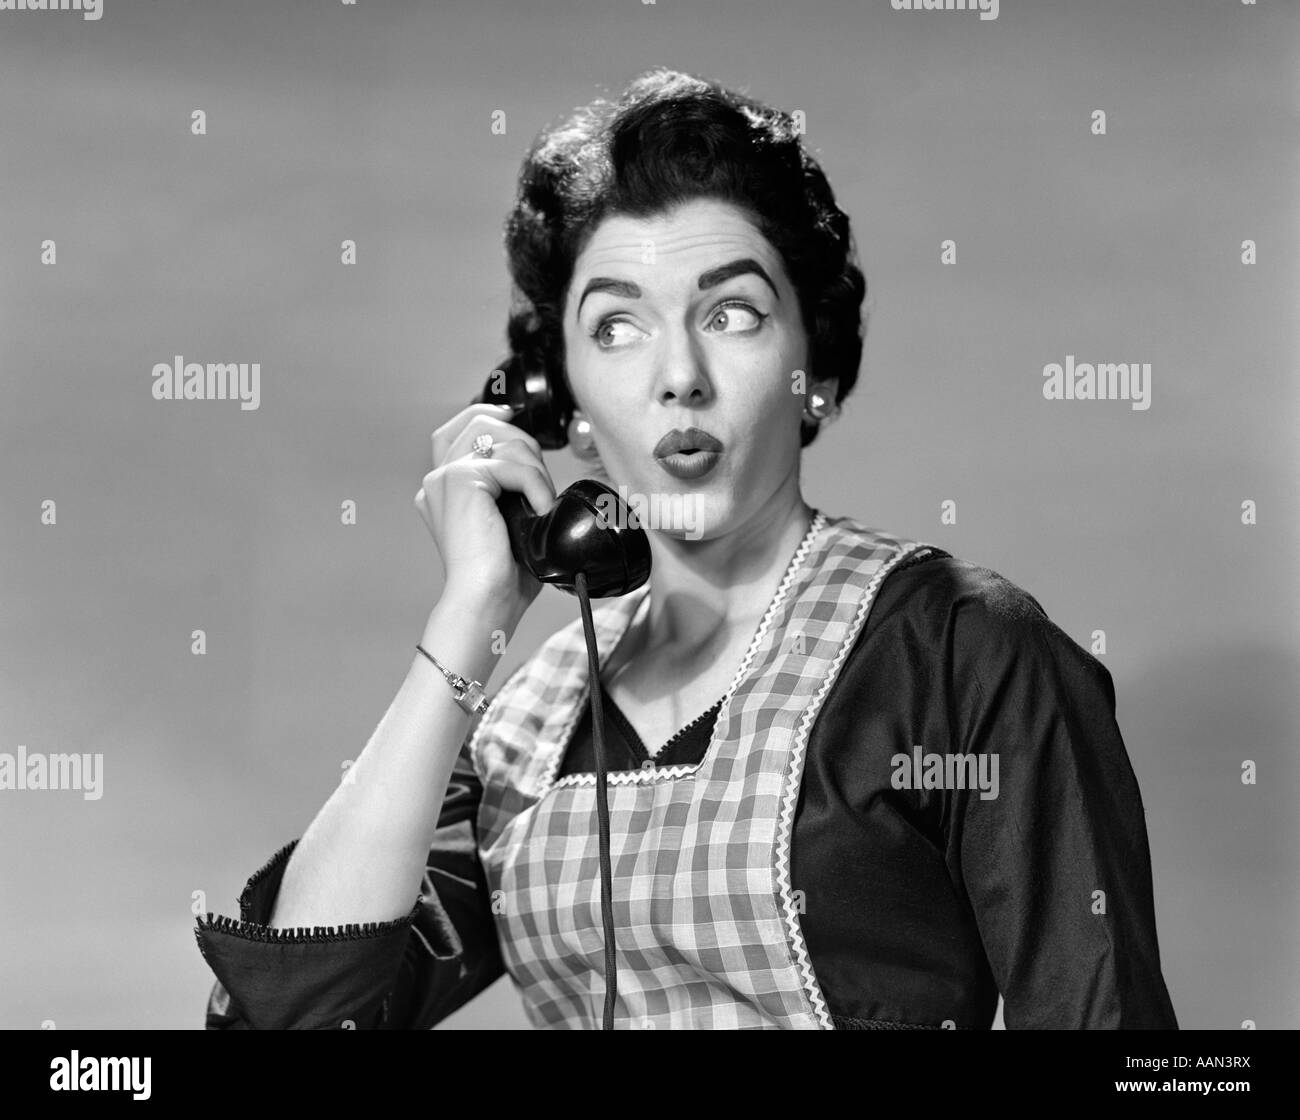 1950s WOMAN WEARING APRON TALKING ON TELEPHONE WITH EXAGGERATED SURPRISED EXPRESSION Stock Photo